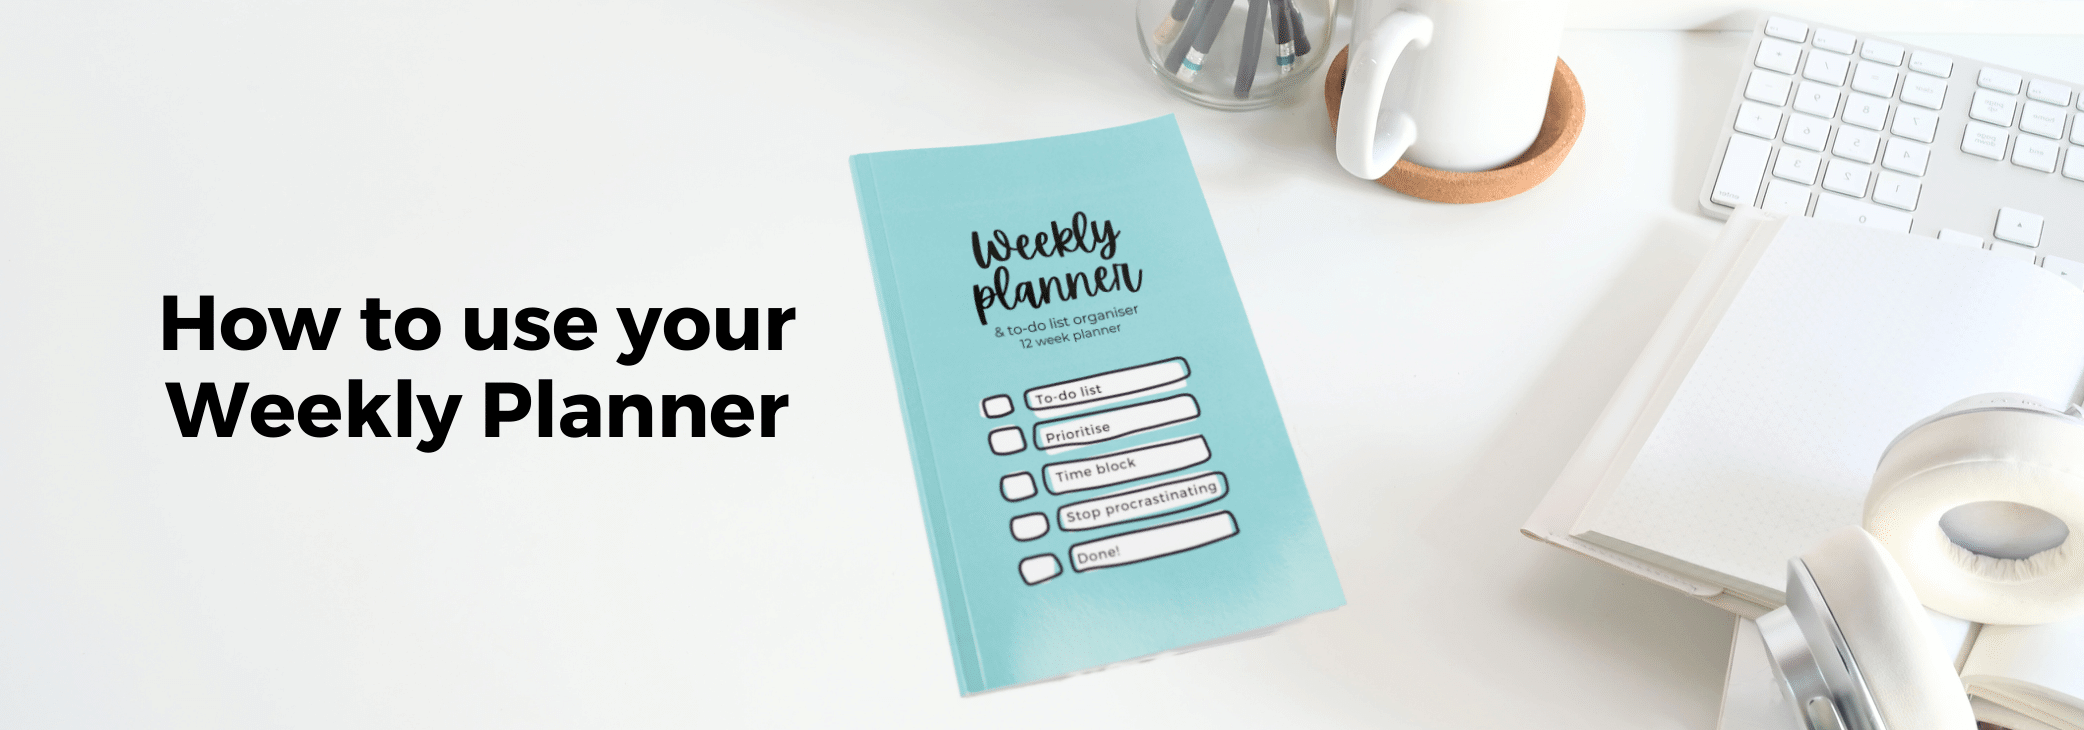 How to use your Weekly Planner 